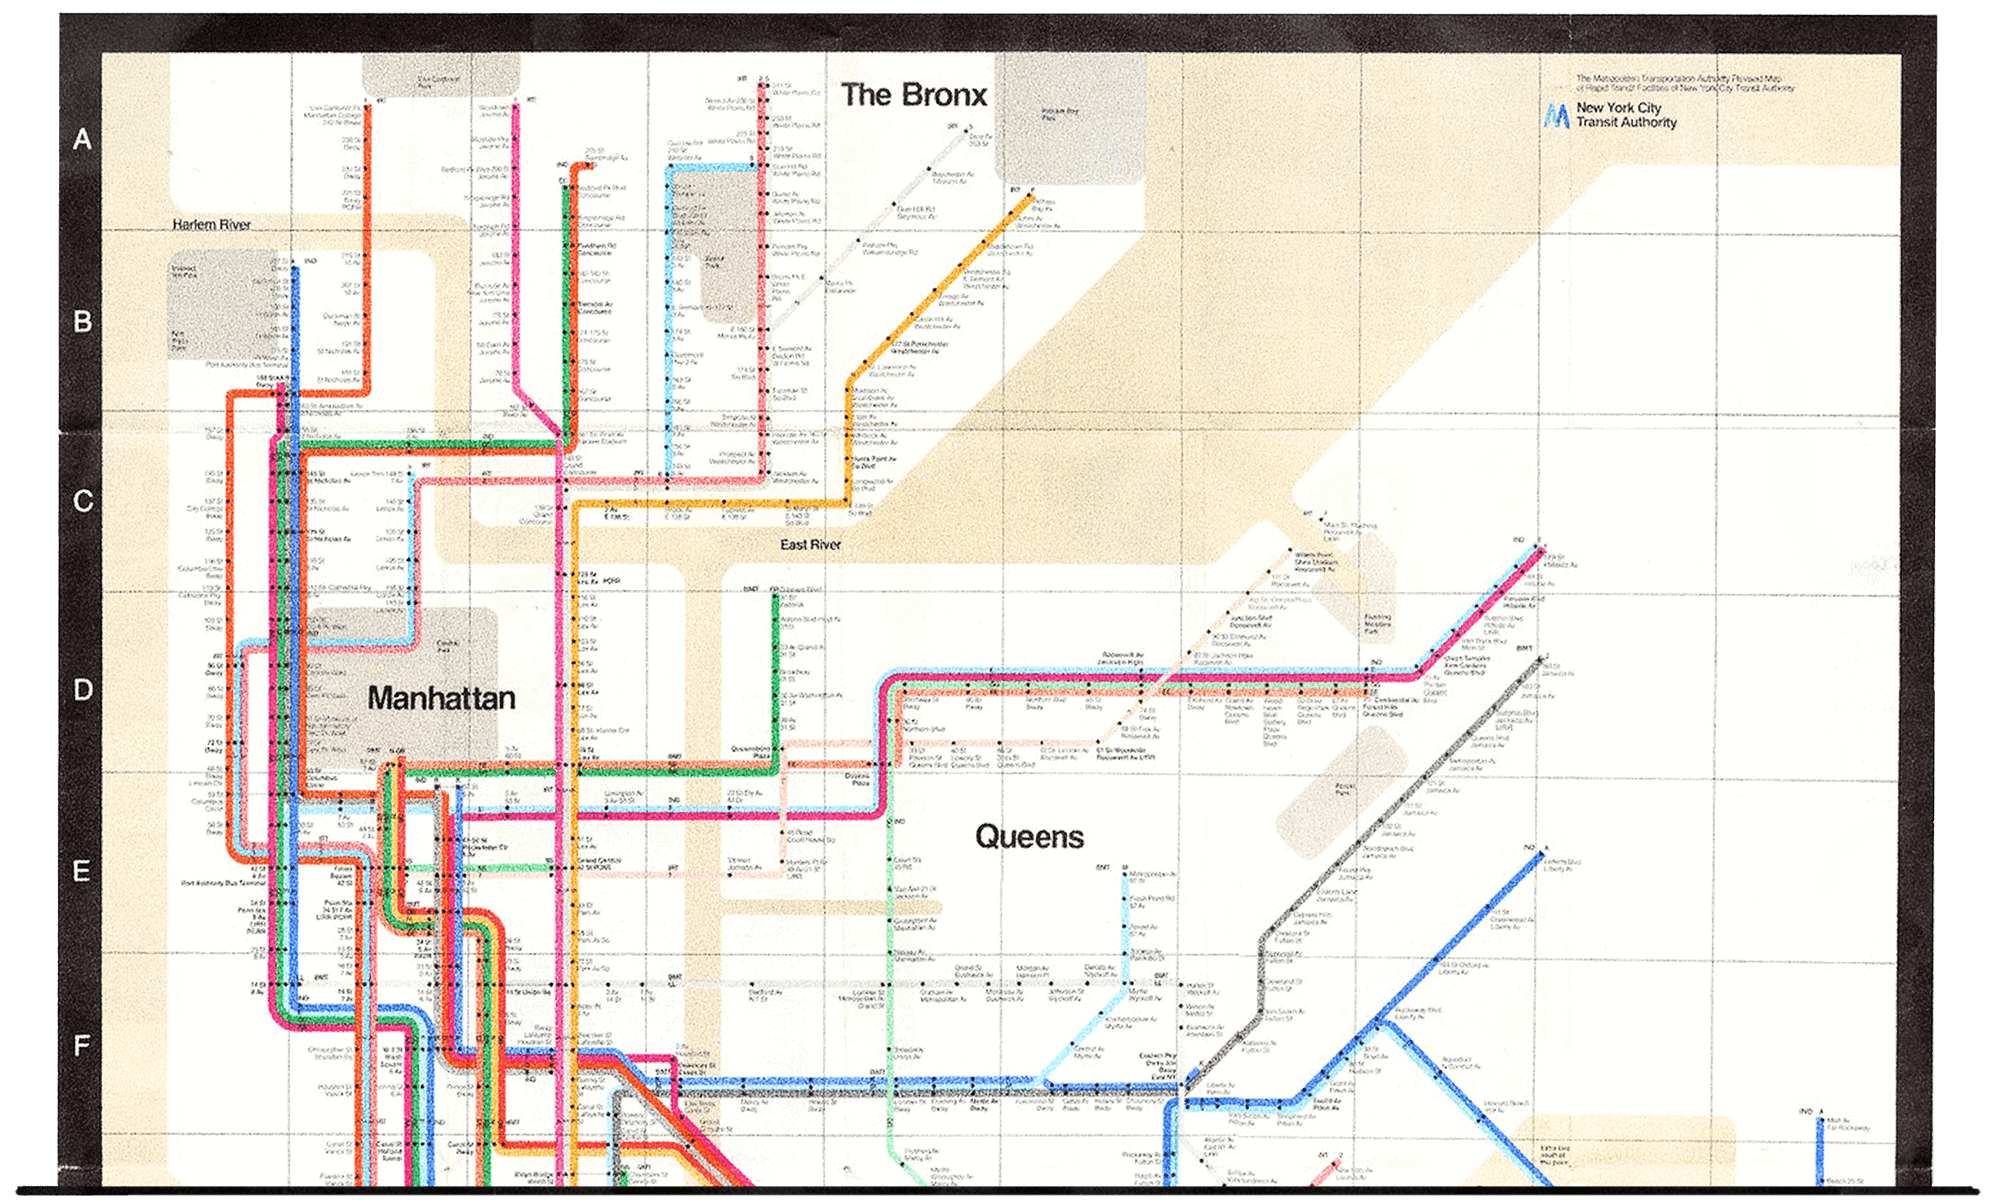 Cropped image of NYC subway system map designed by Massimo Vignelli